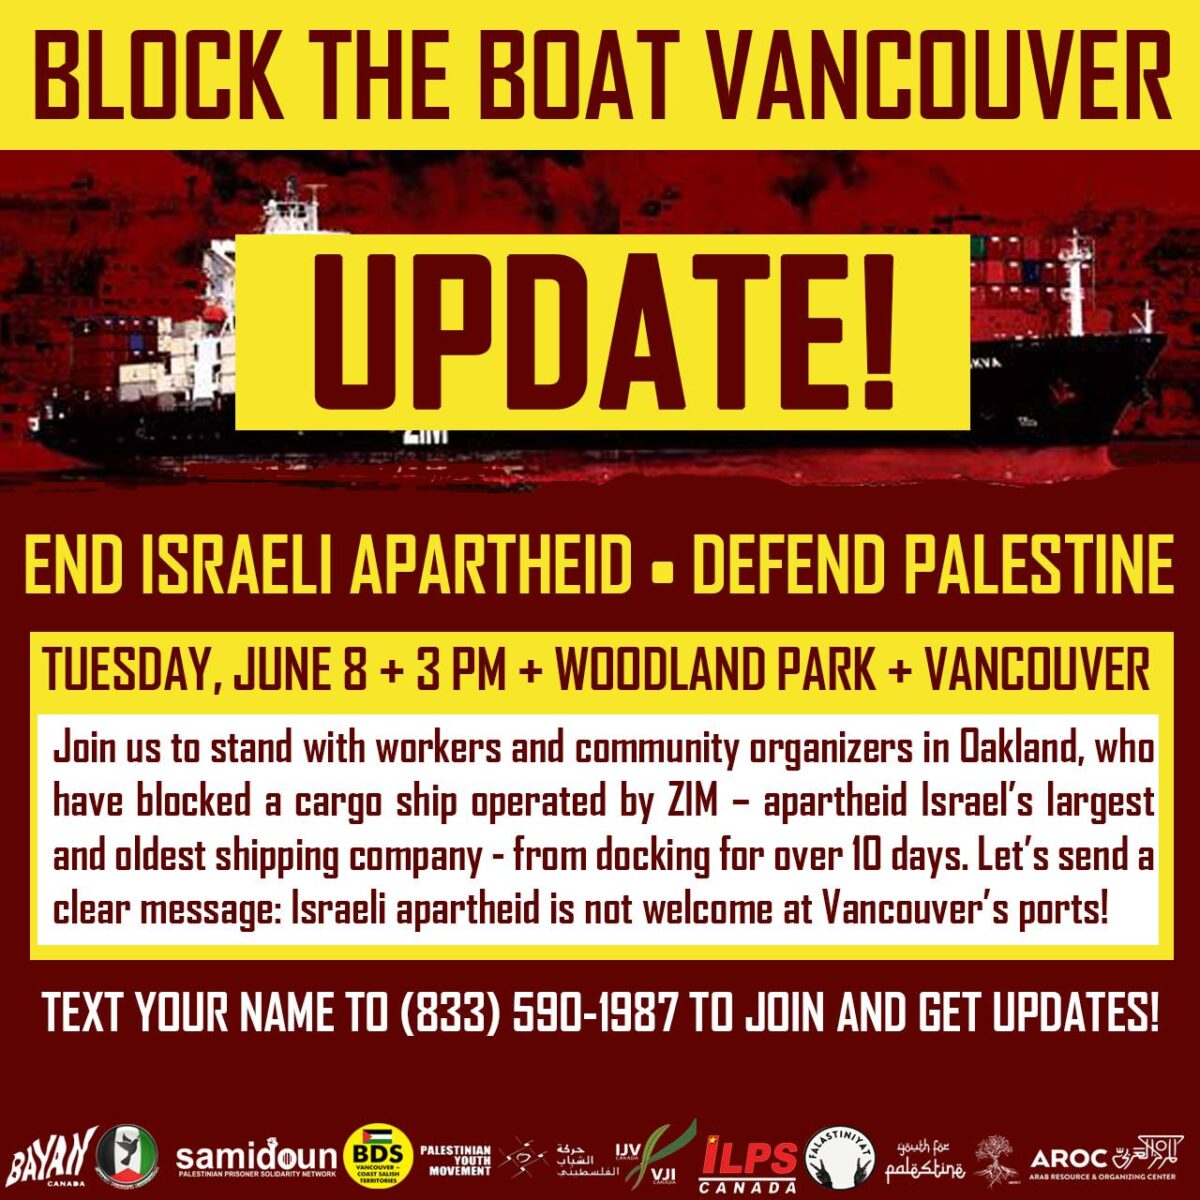 Block the Boat Vancouver